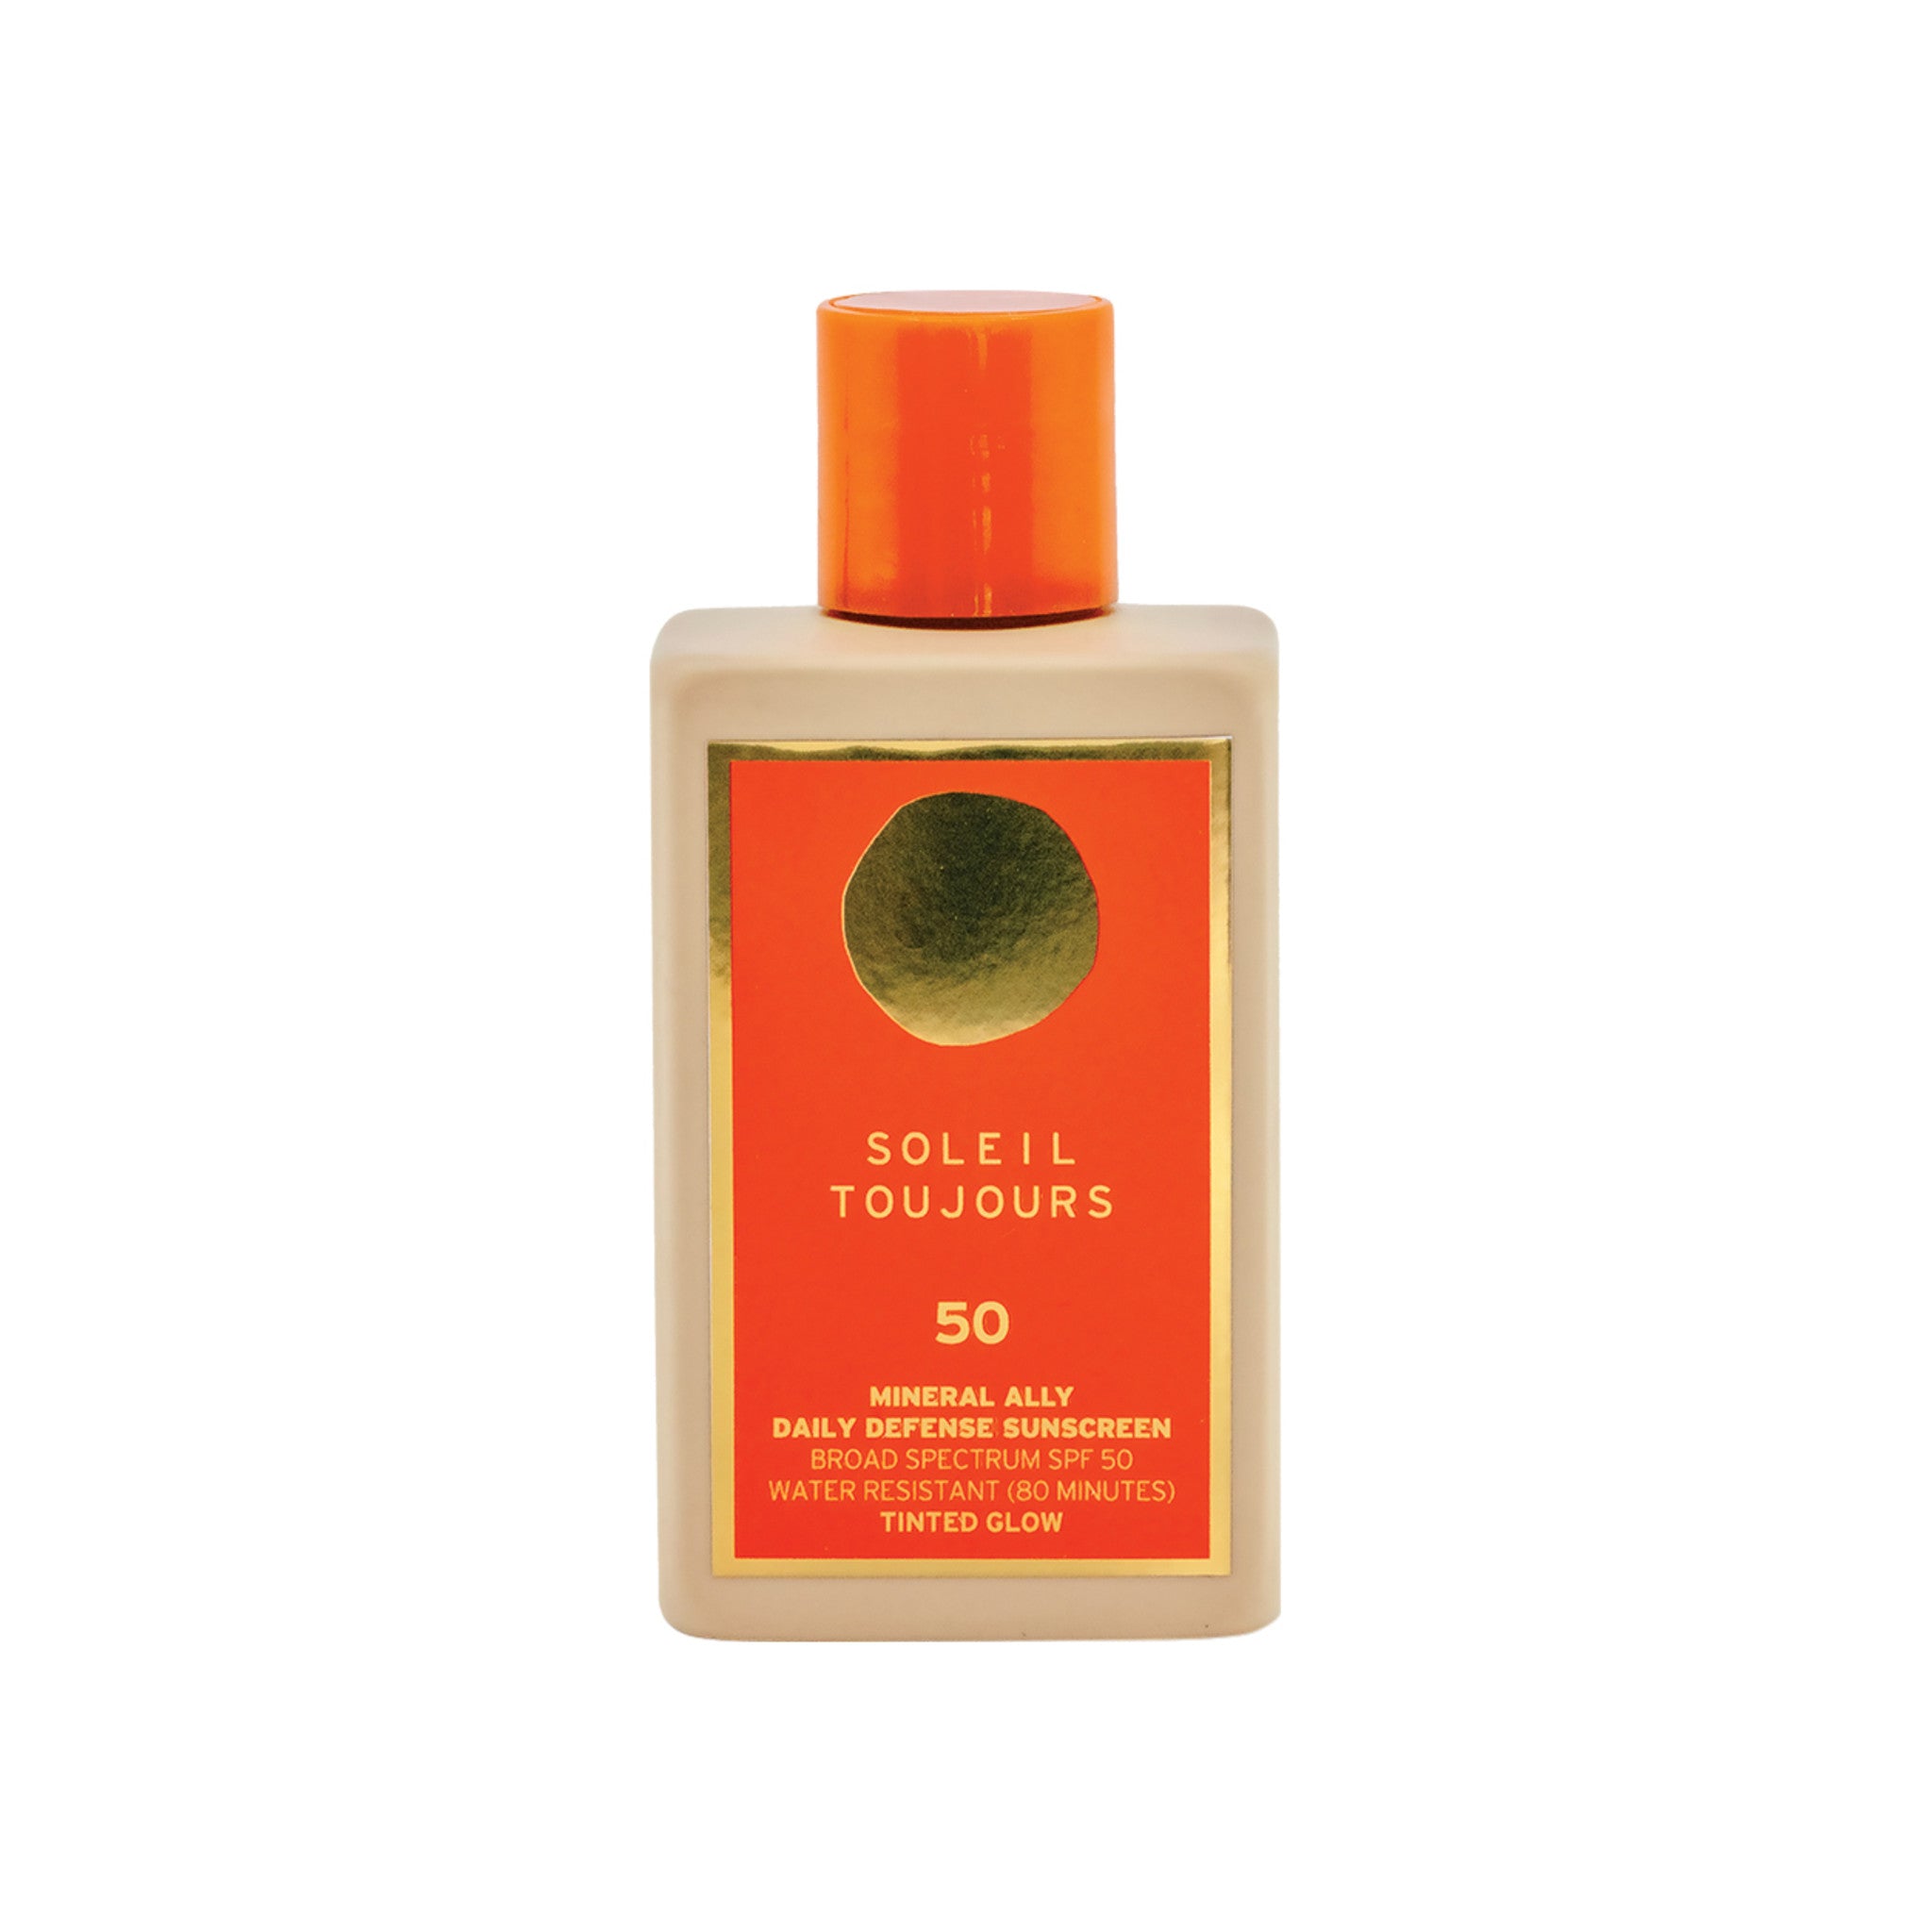 Soleil Toujours Mineral Ally Daily Face Glow SPF 50 main image. This product is for medium complexions